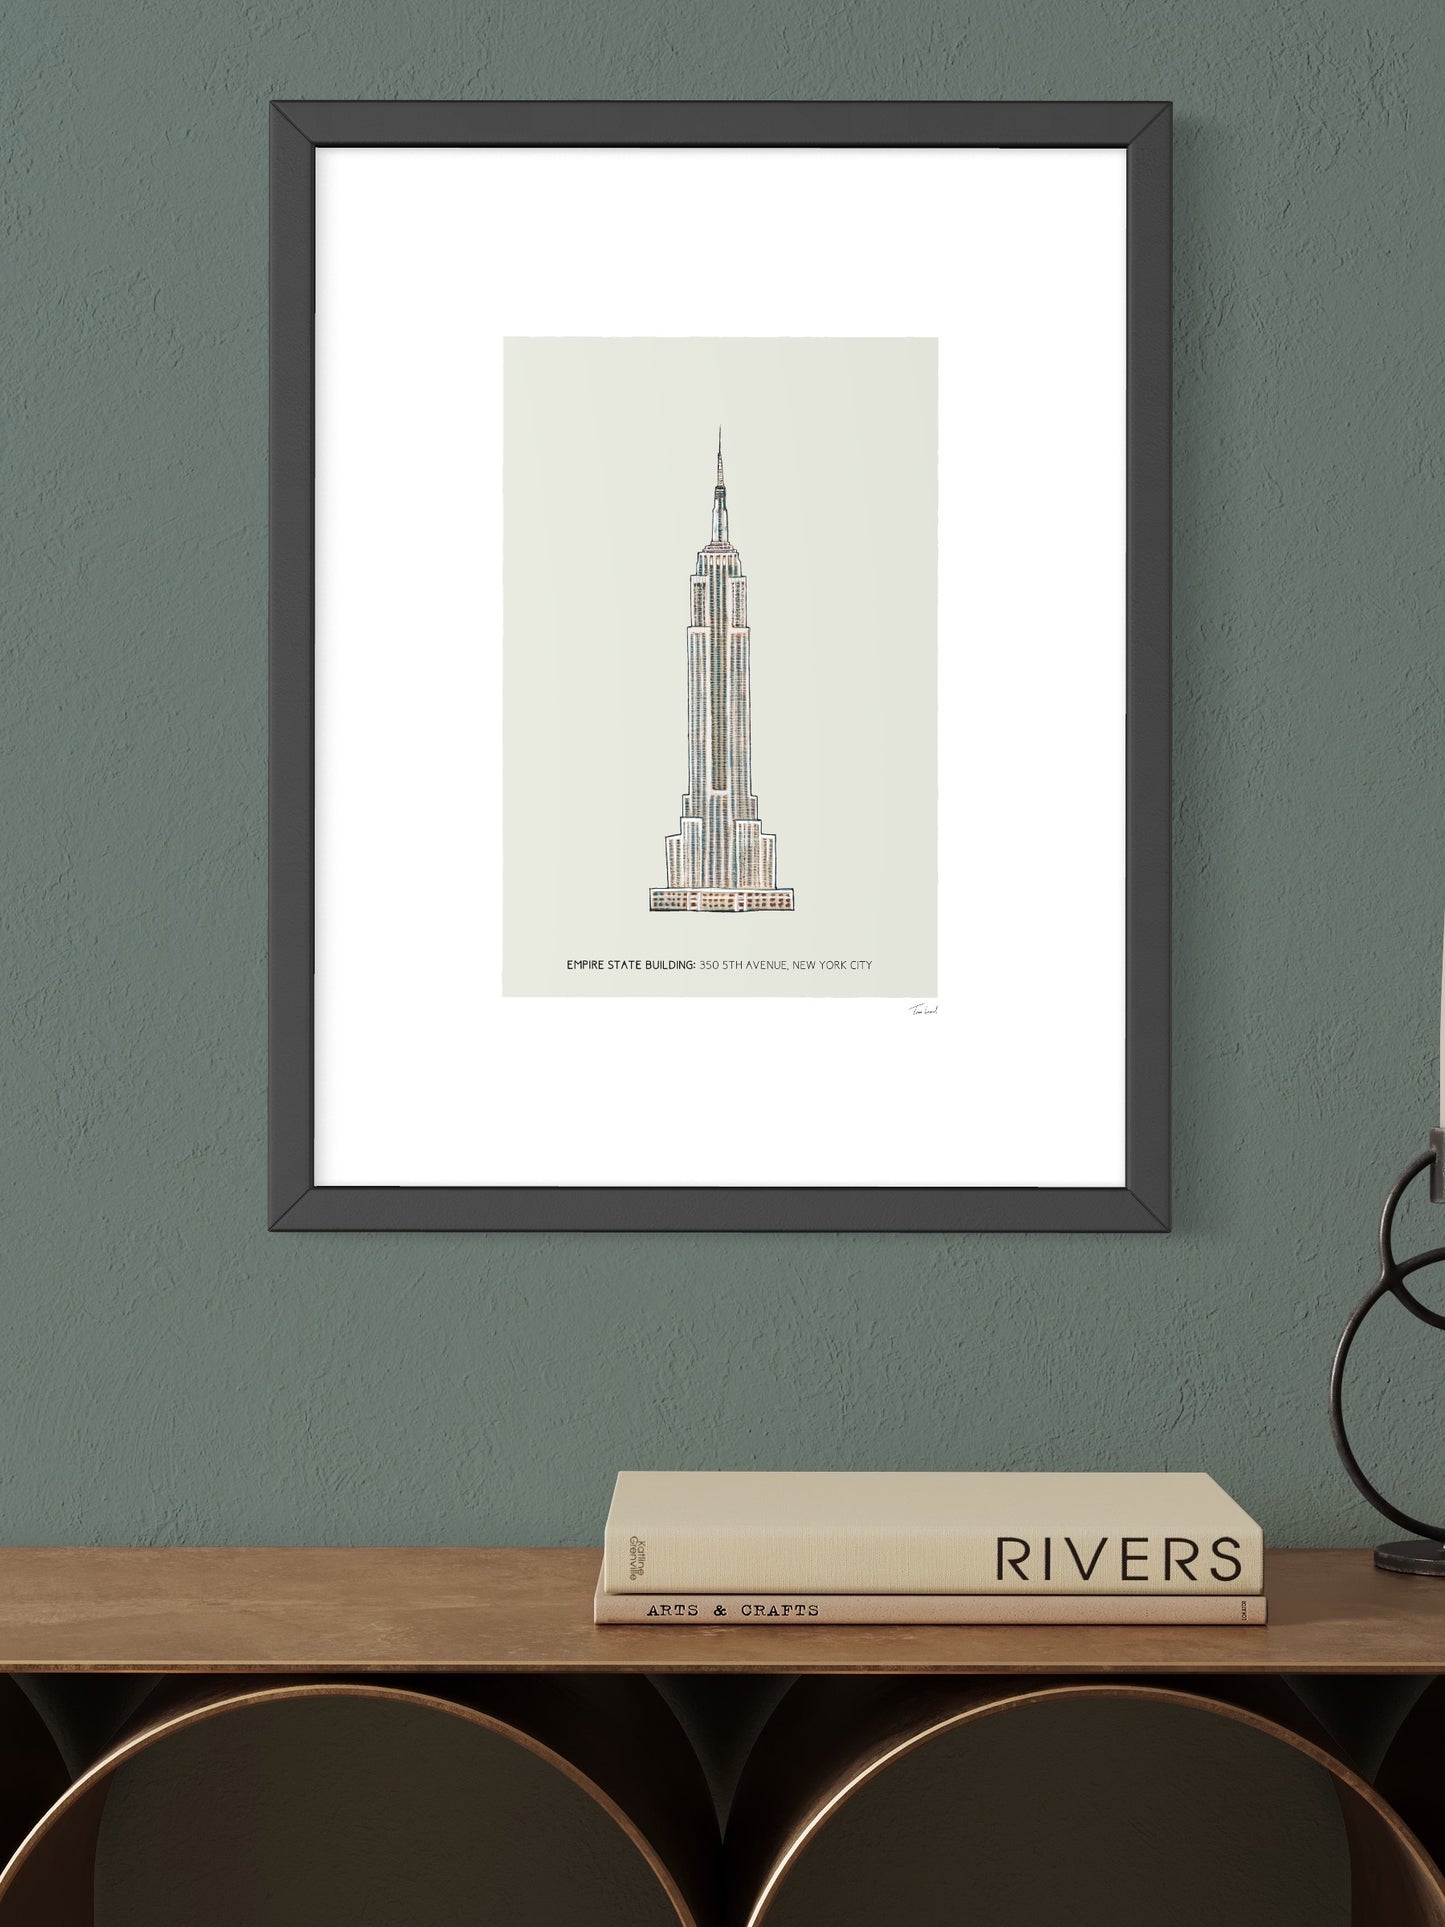 This image shows a giclee wall art print by Tom Laird Illustration of the world-famous New York City landmark the Empire State Building, framed in a beautiful living room with tasteful modern home decor. This art print is available from Tom Laird Illustration in A4 size.